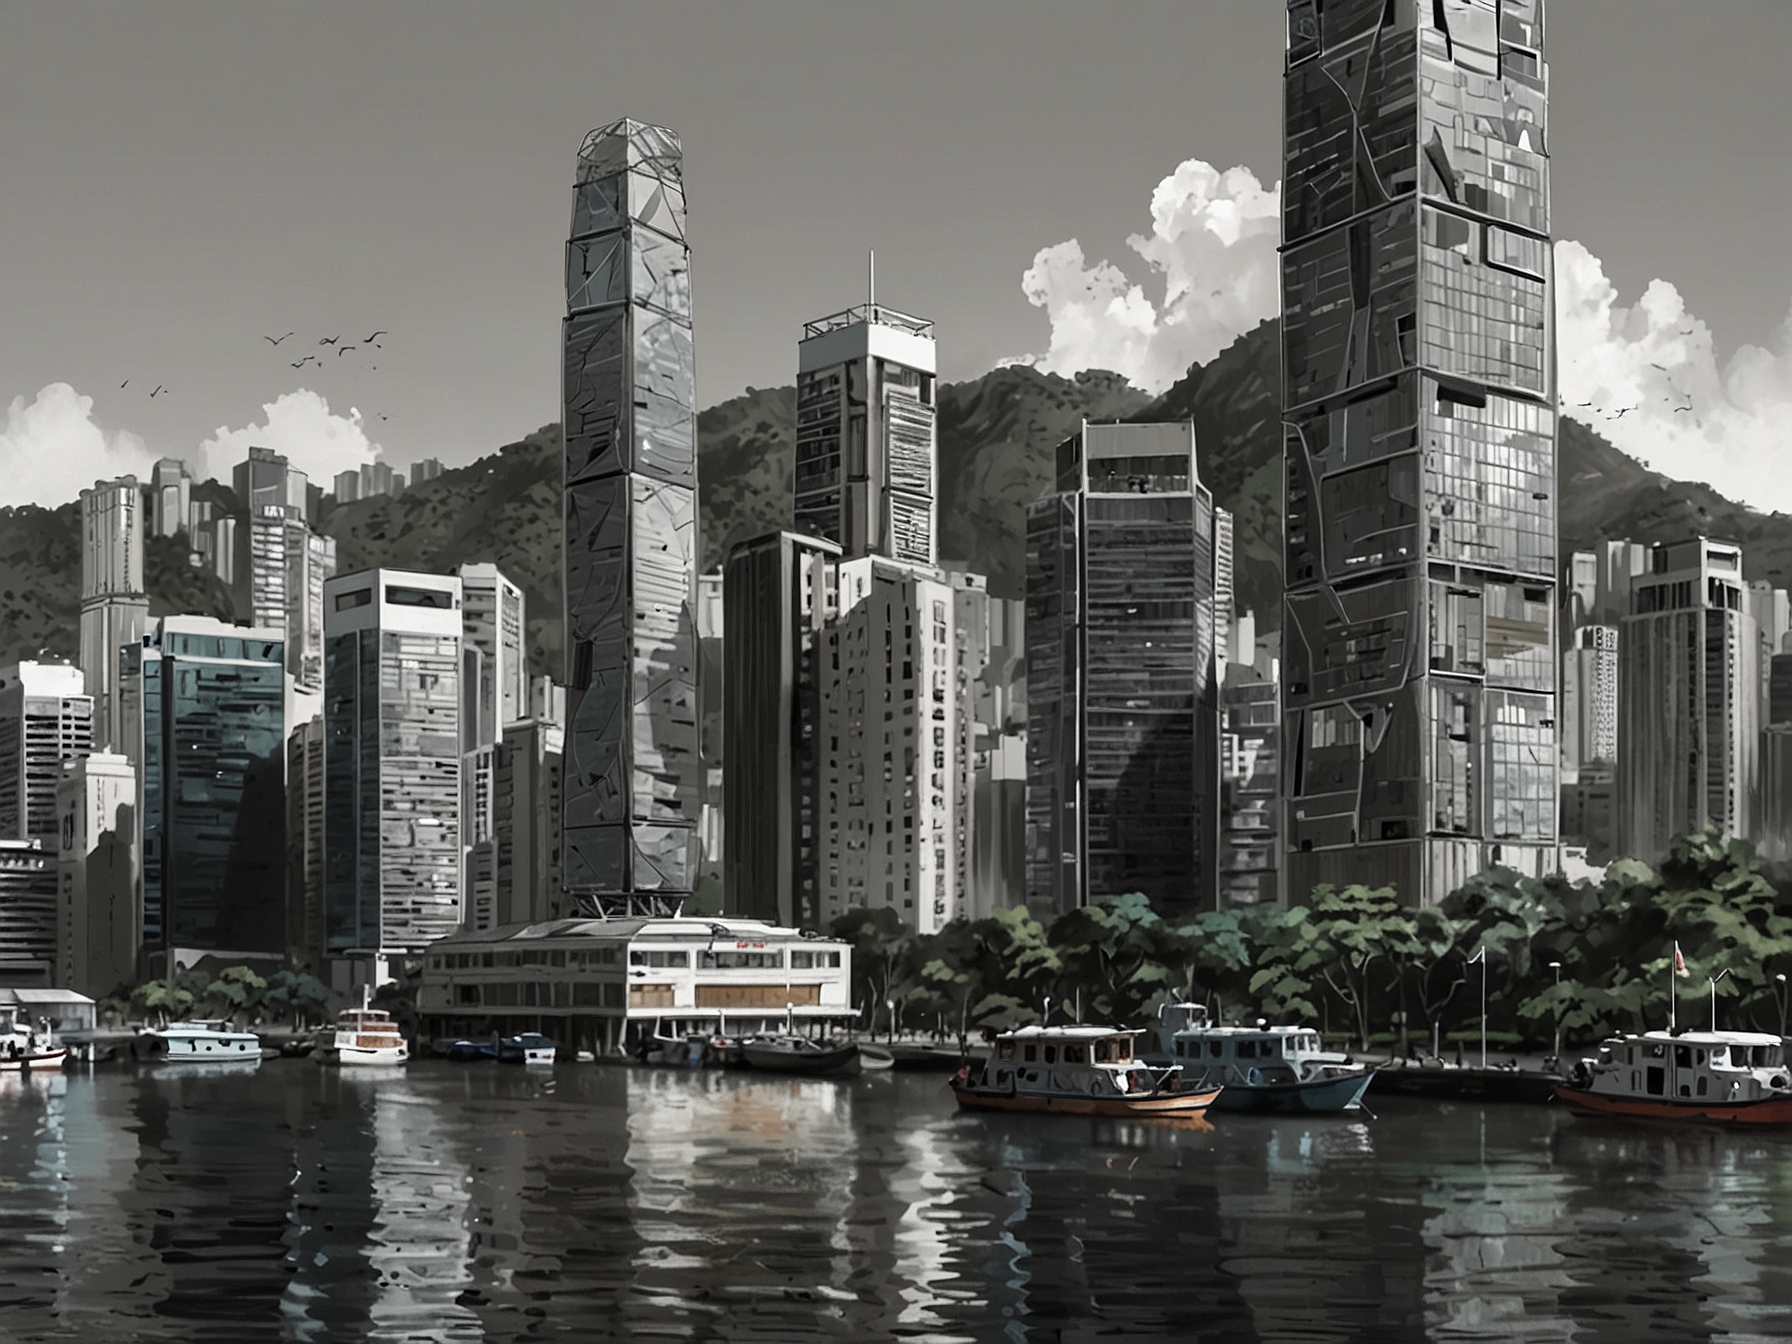 A panoramic view of Hong Kong SAR's vibrant business district, highlighting the strategic location of Pudu Robotics' new International Operation Headquarter amid the city's skyscrapers and infrastructure.